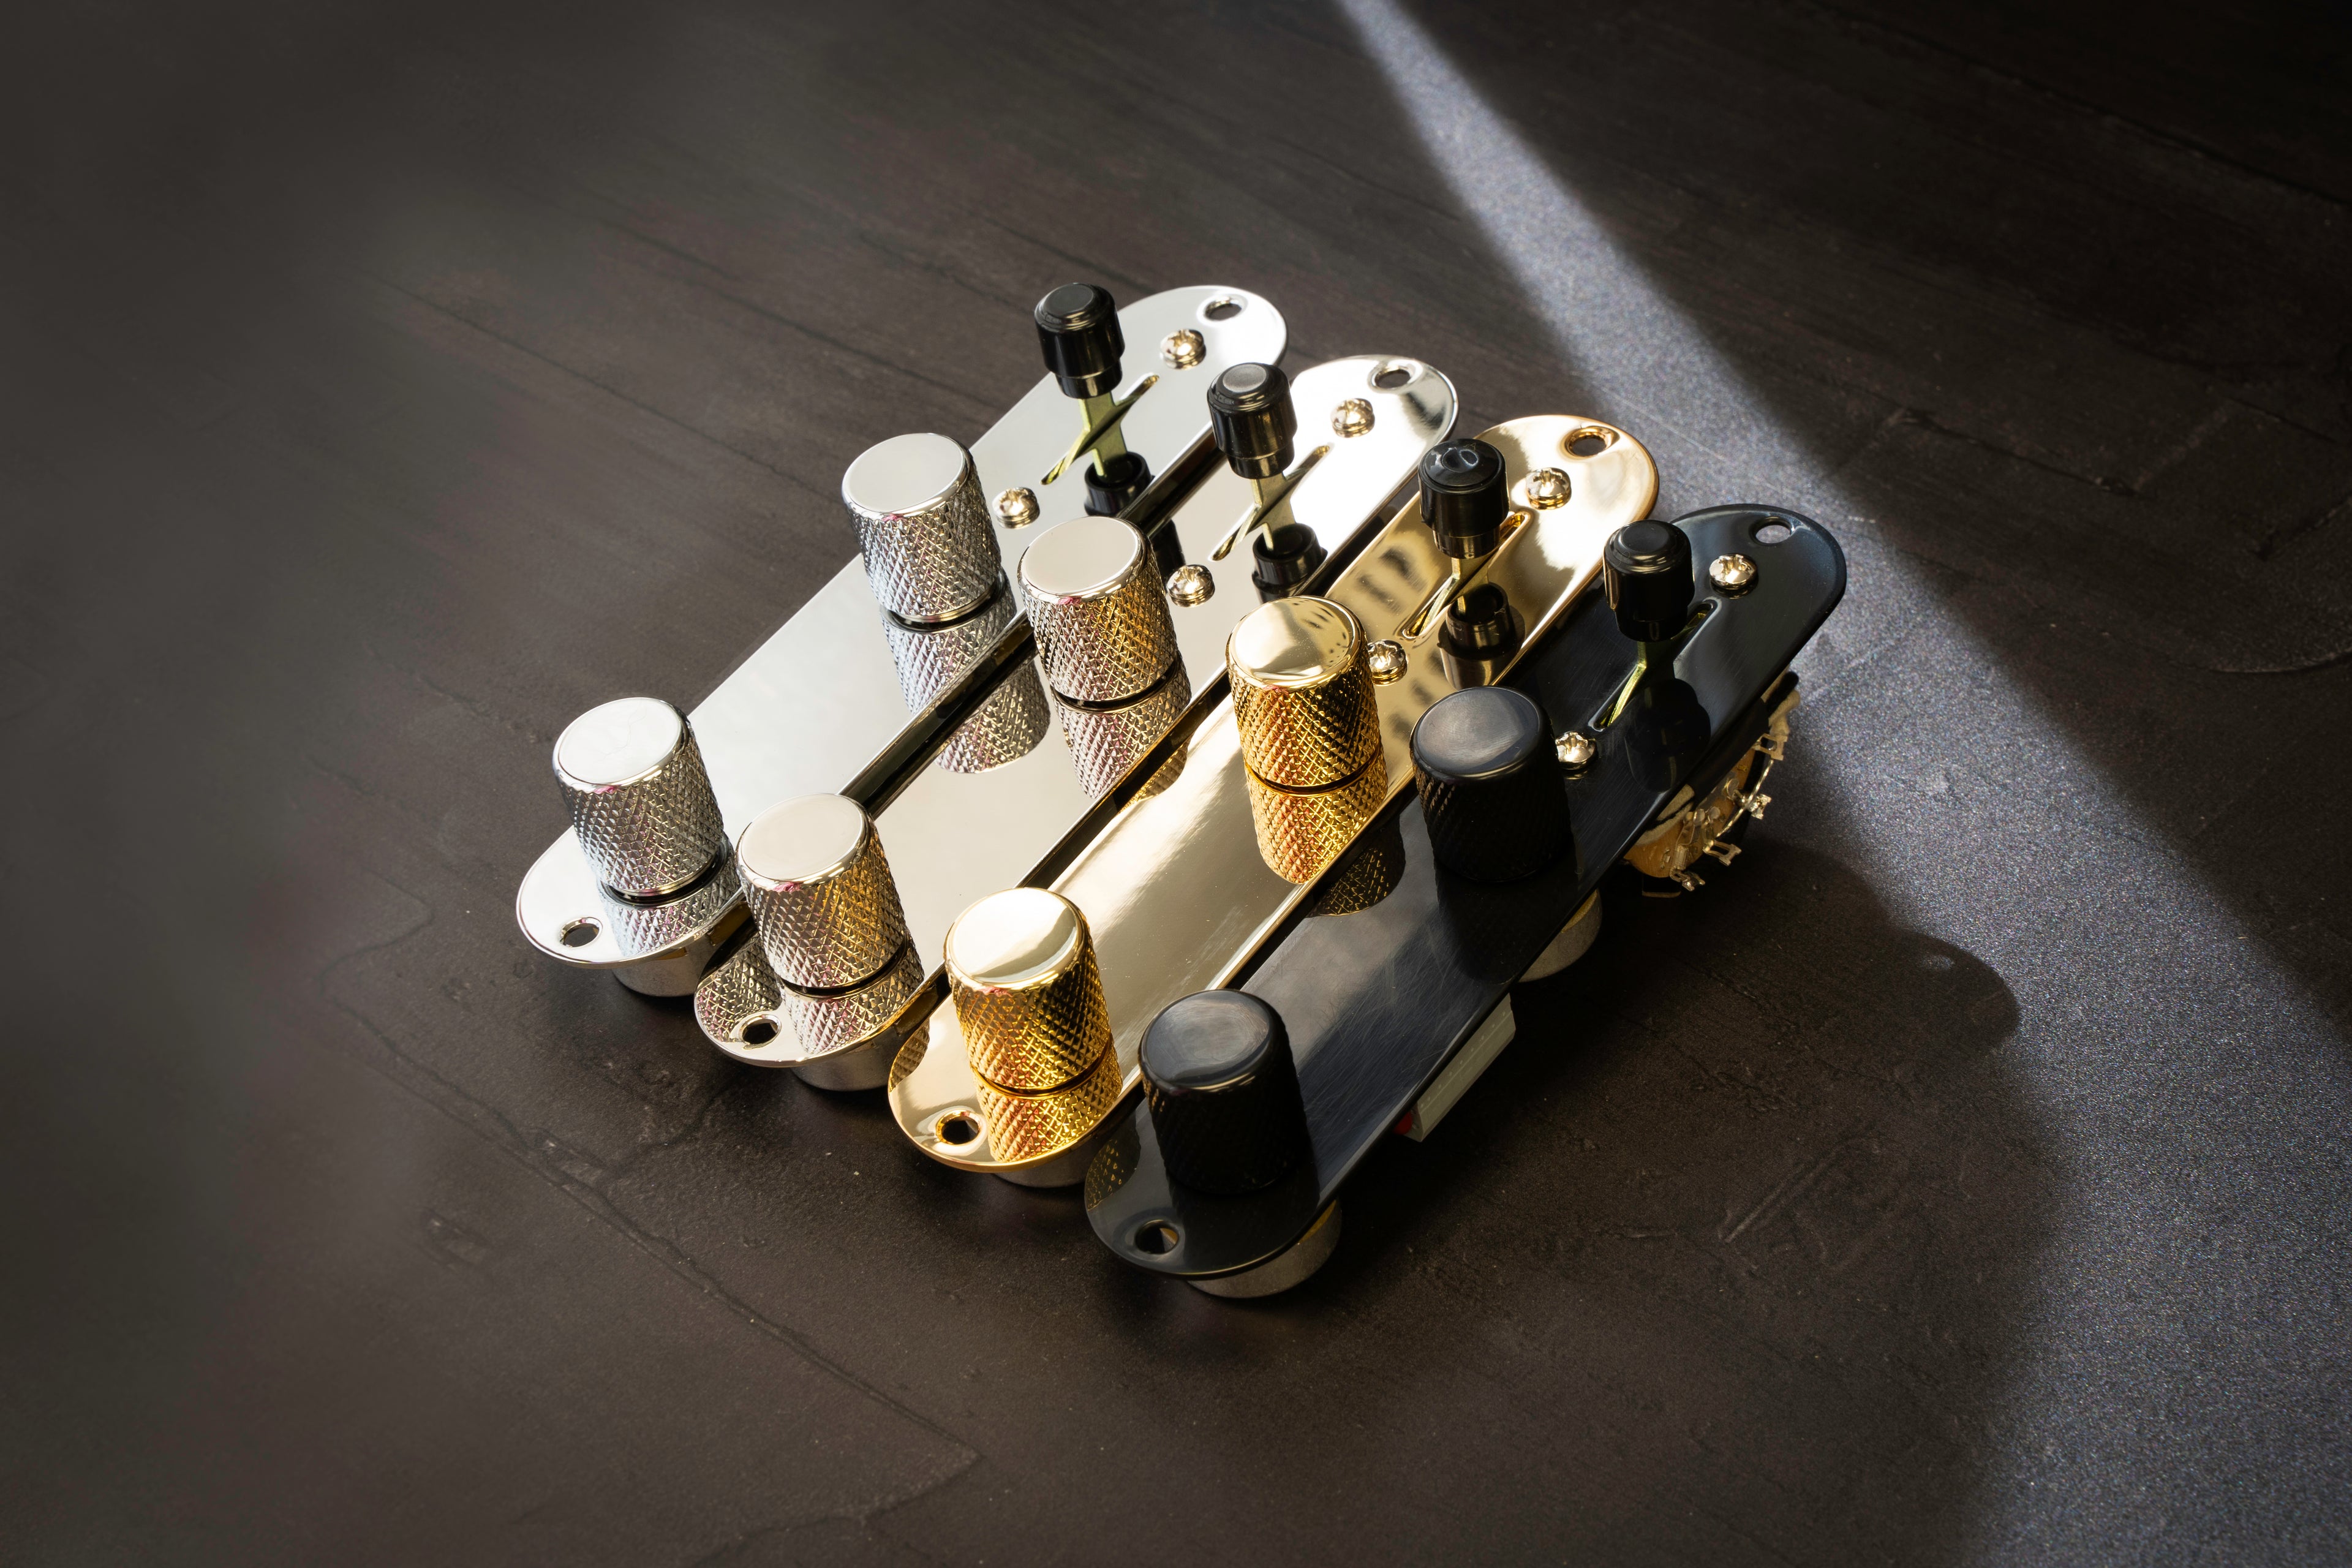 a row of obsidianwire loaded control plates for telecaster with chrome, nickel, black and gold options.